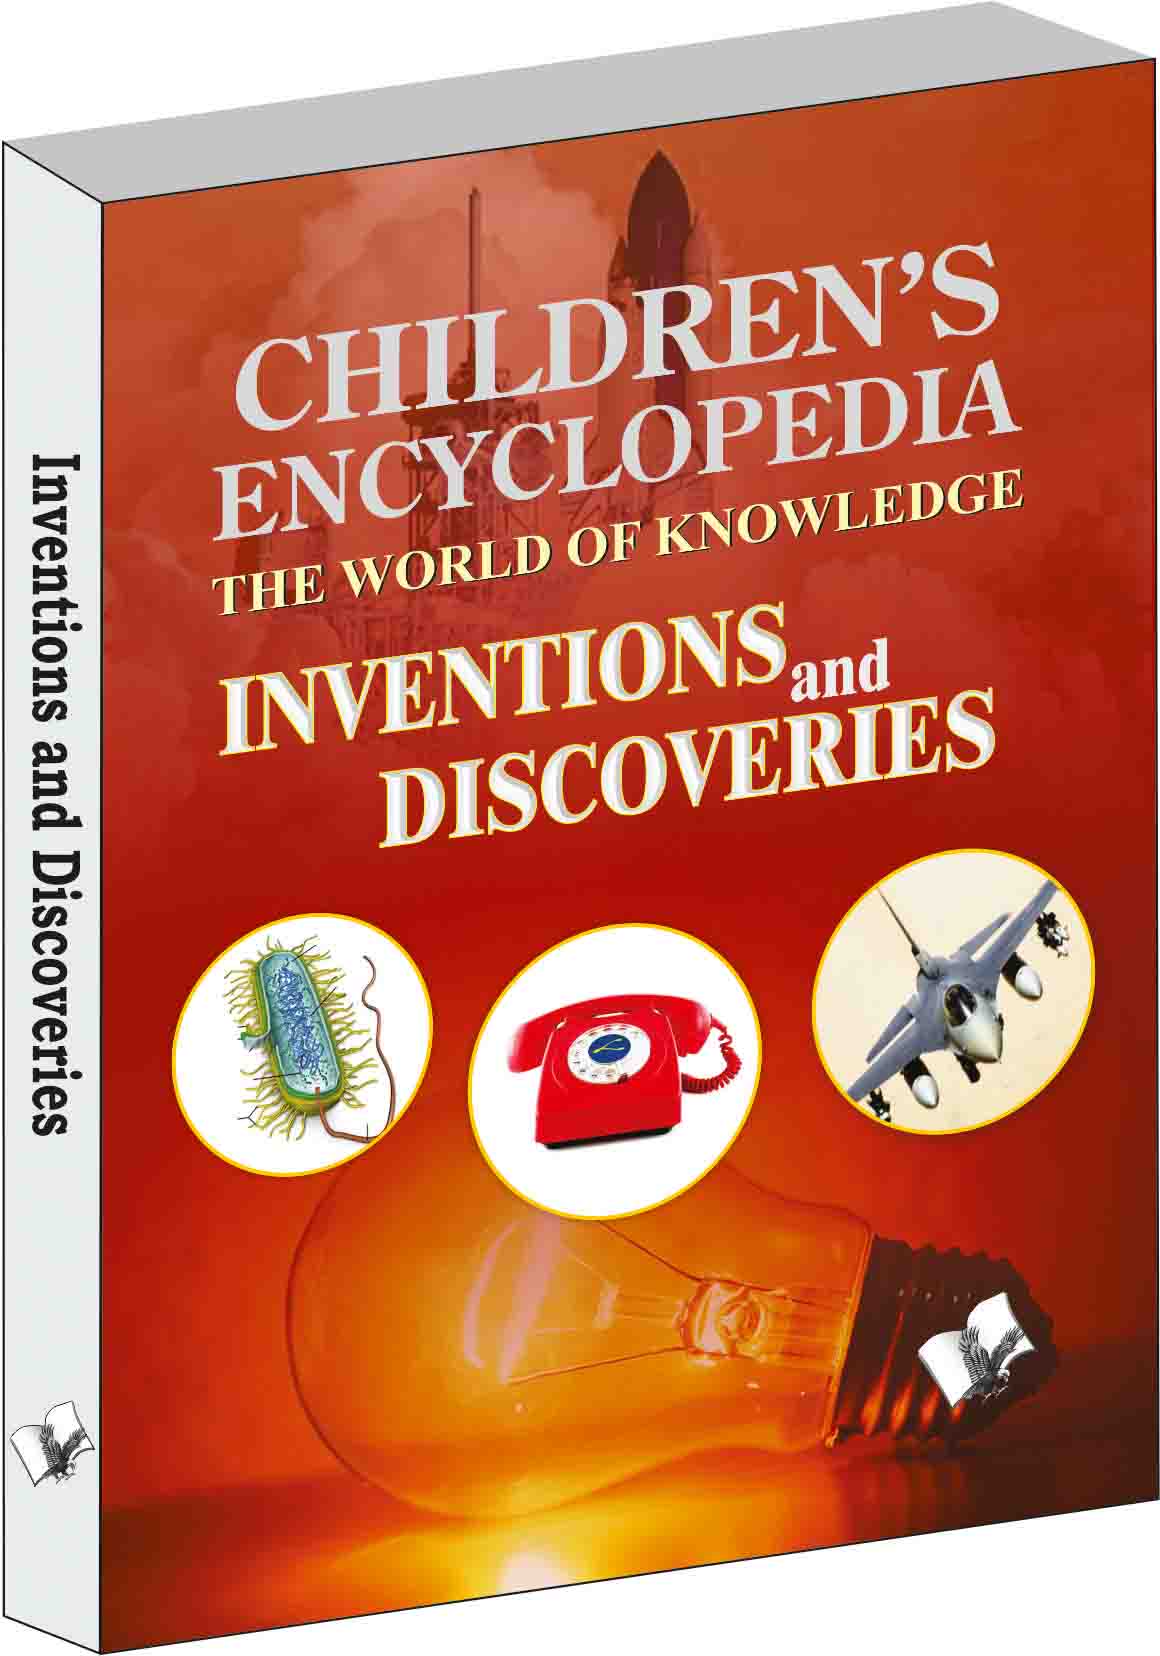 Children's Encyclopedia - Inventions and Discoveries -The world of knowledge for the inquisitive minds